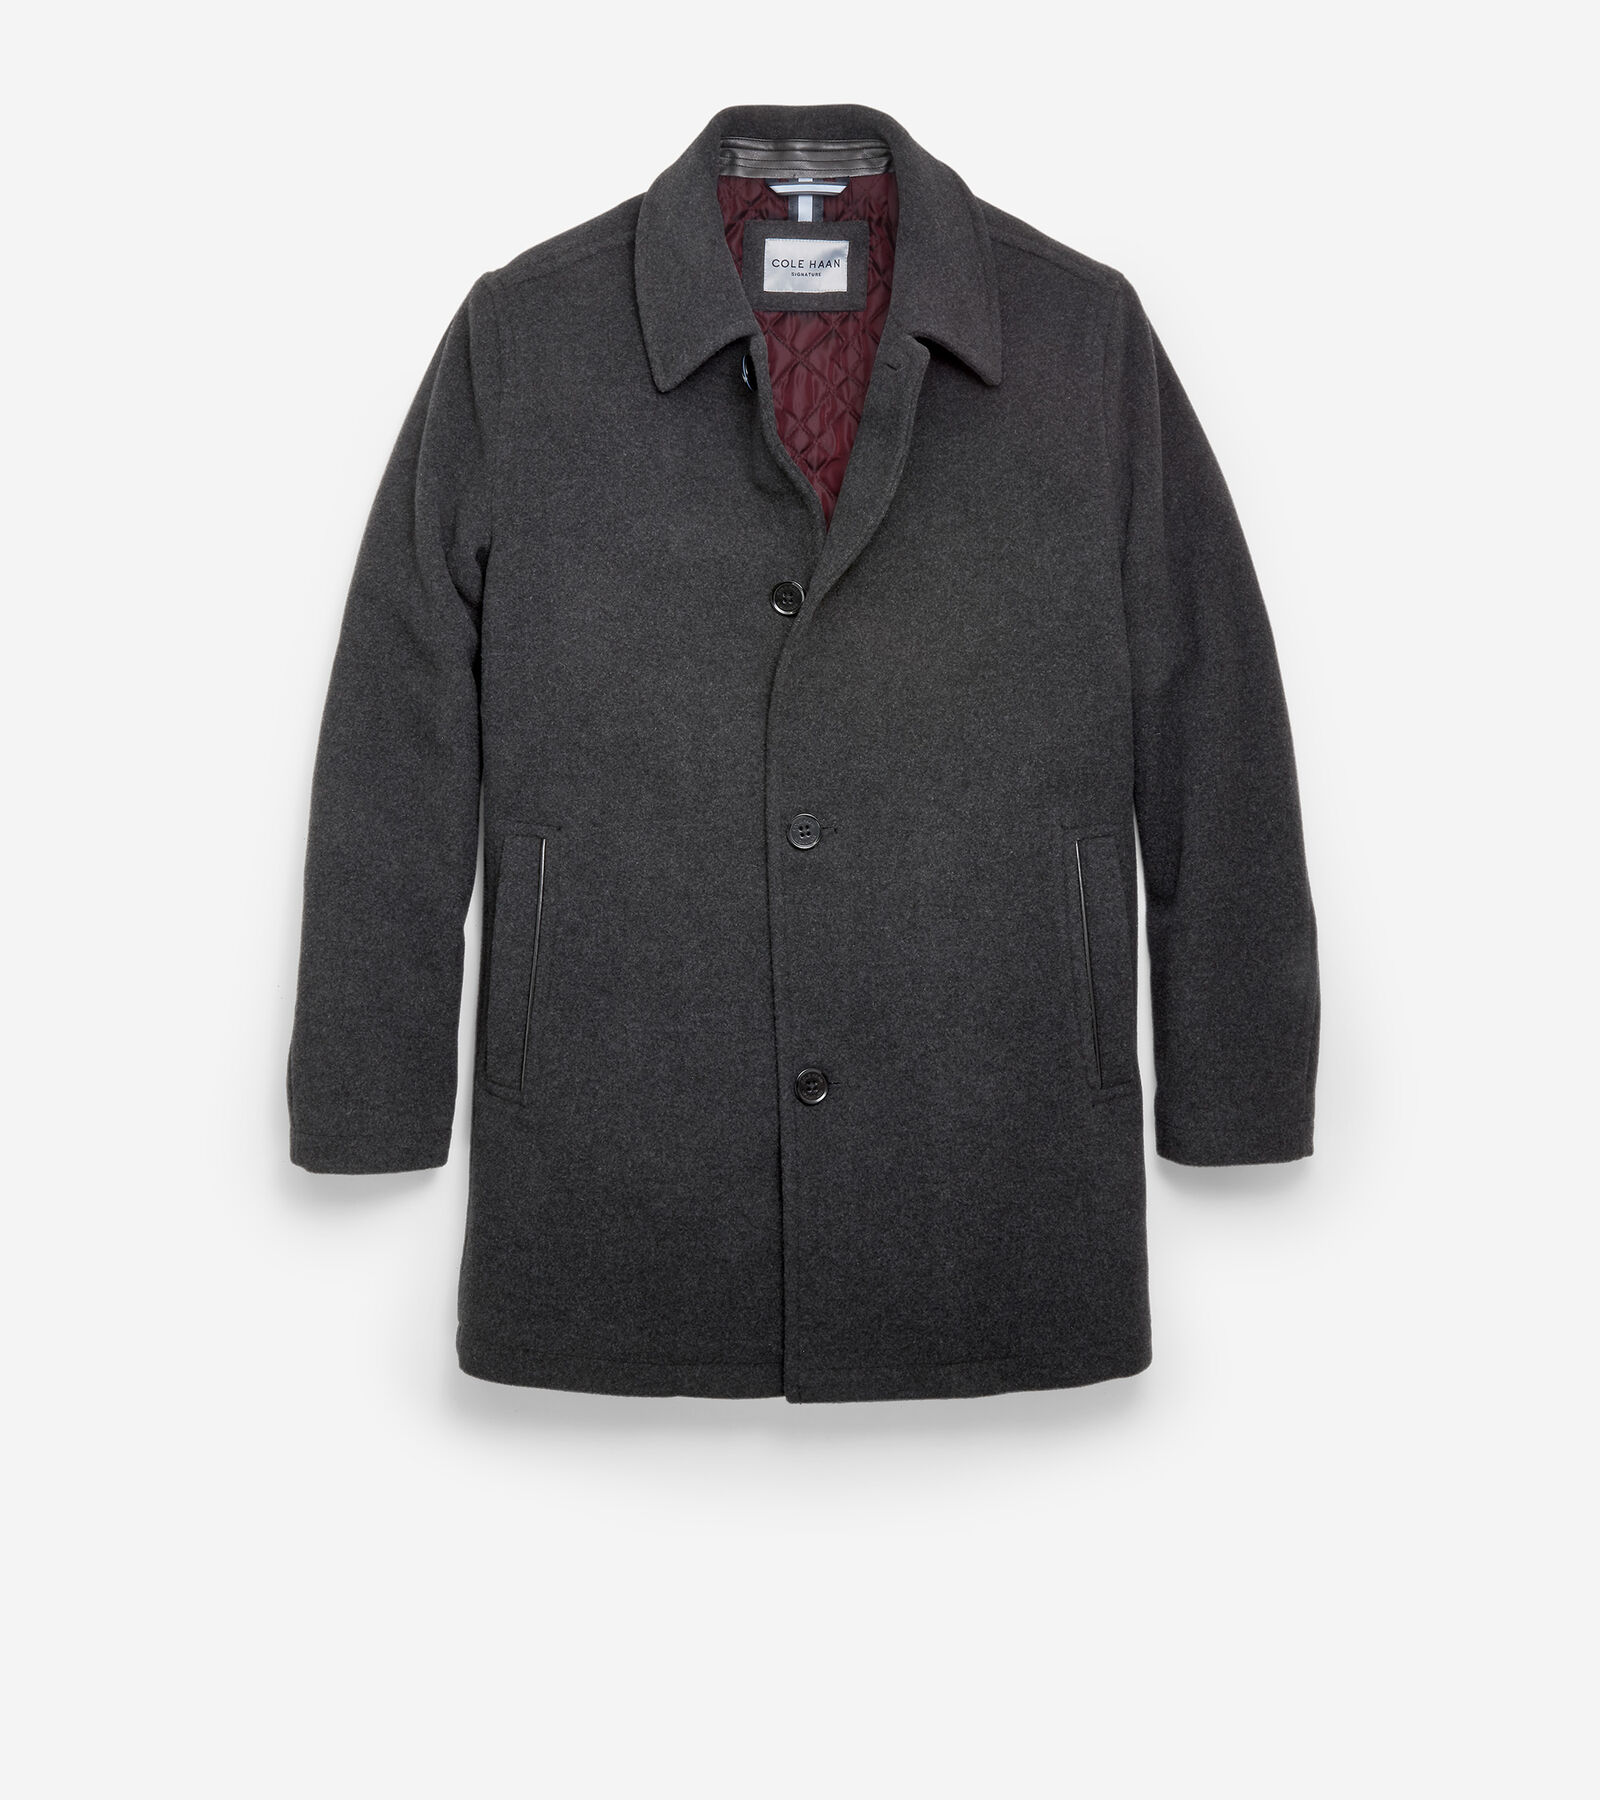 Cole Haan 34" Wool Plush Carcoat In Charcoal